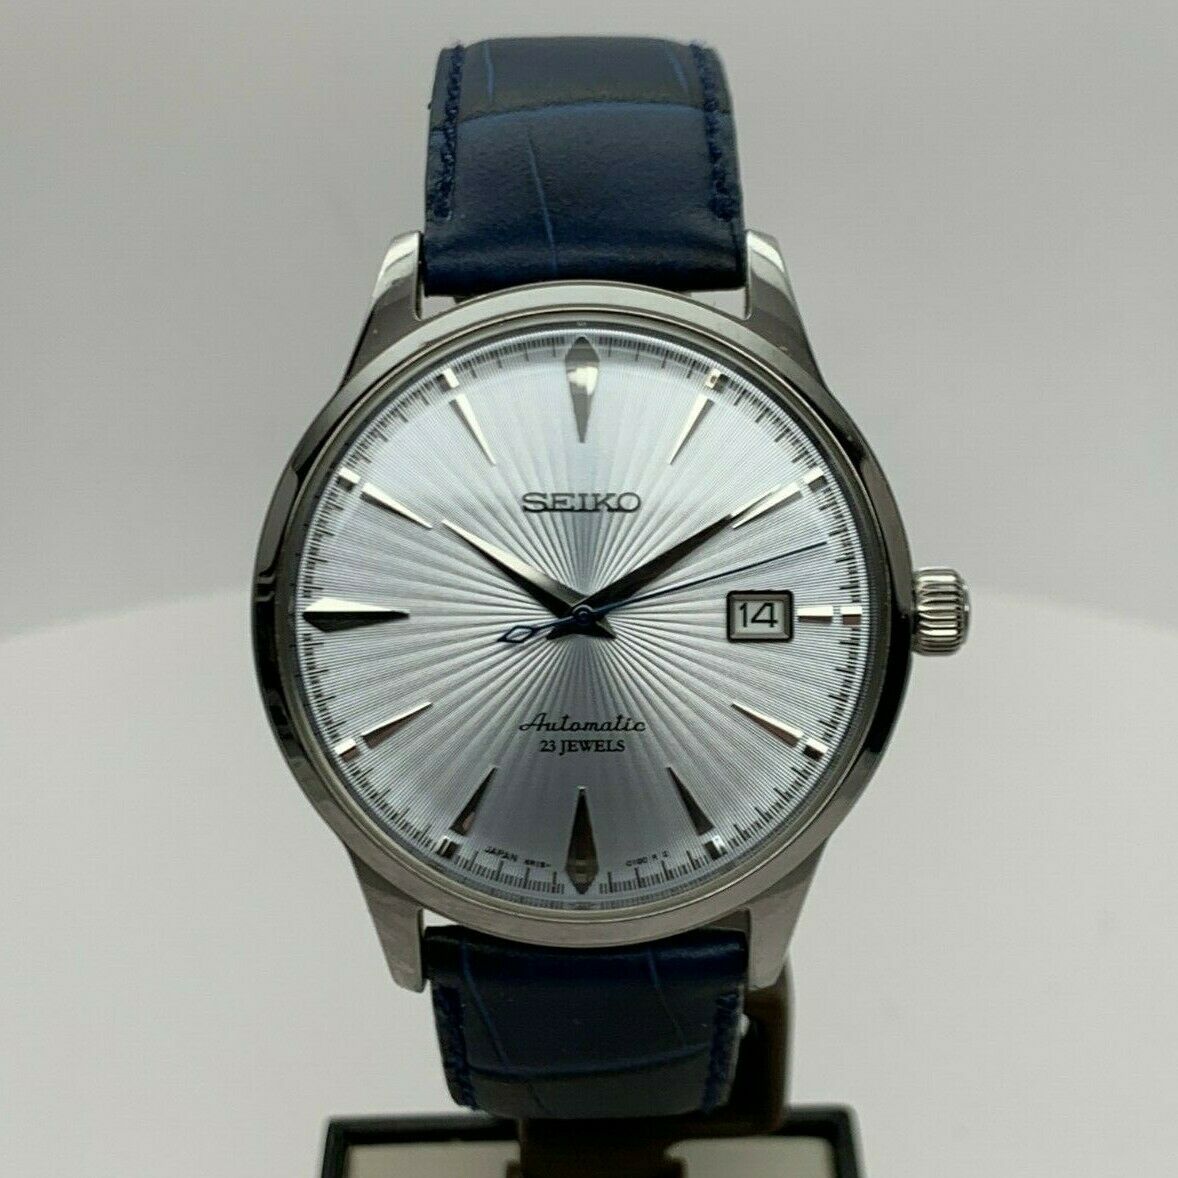 SEIKO Cocktail Time ref SARB065 Automatic 6R15-01S0 Watch BEAUTIFUL & RARE  - NR! | WatchCharts